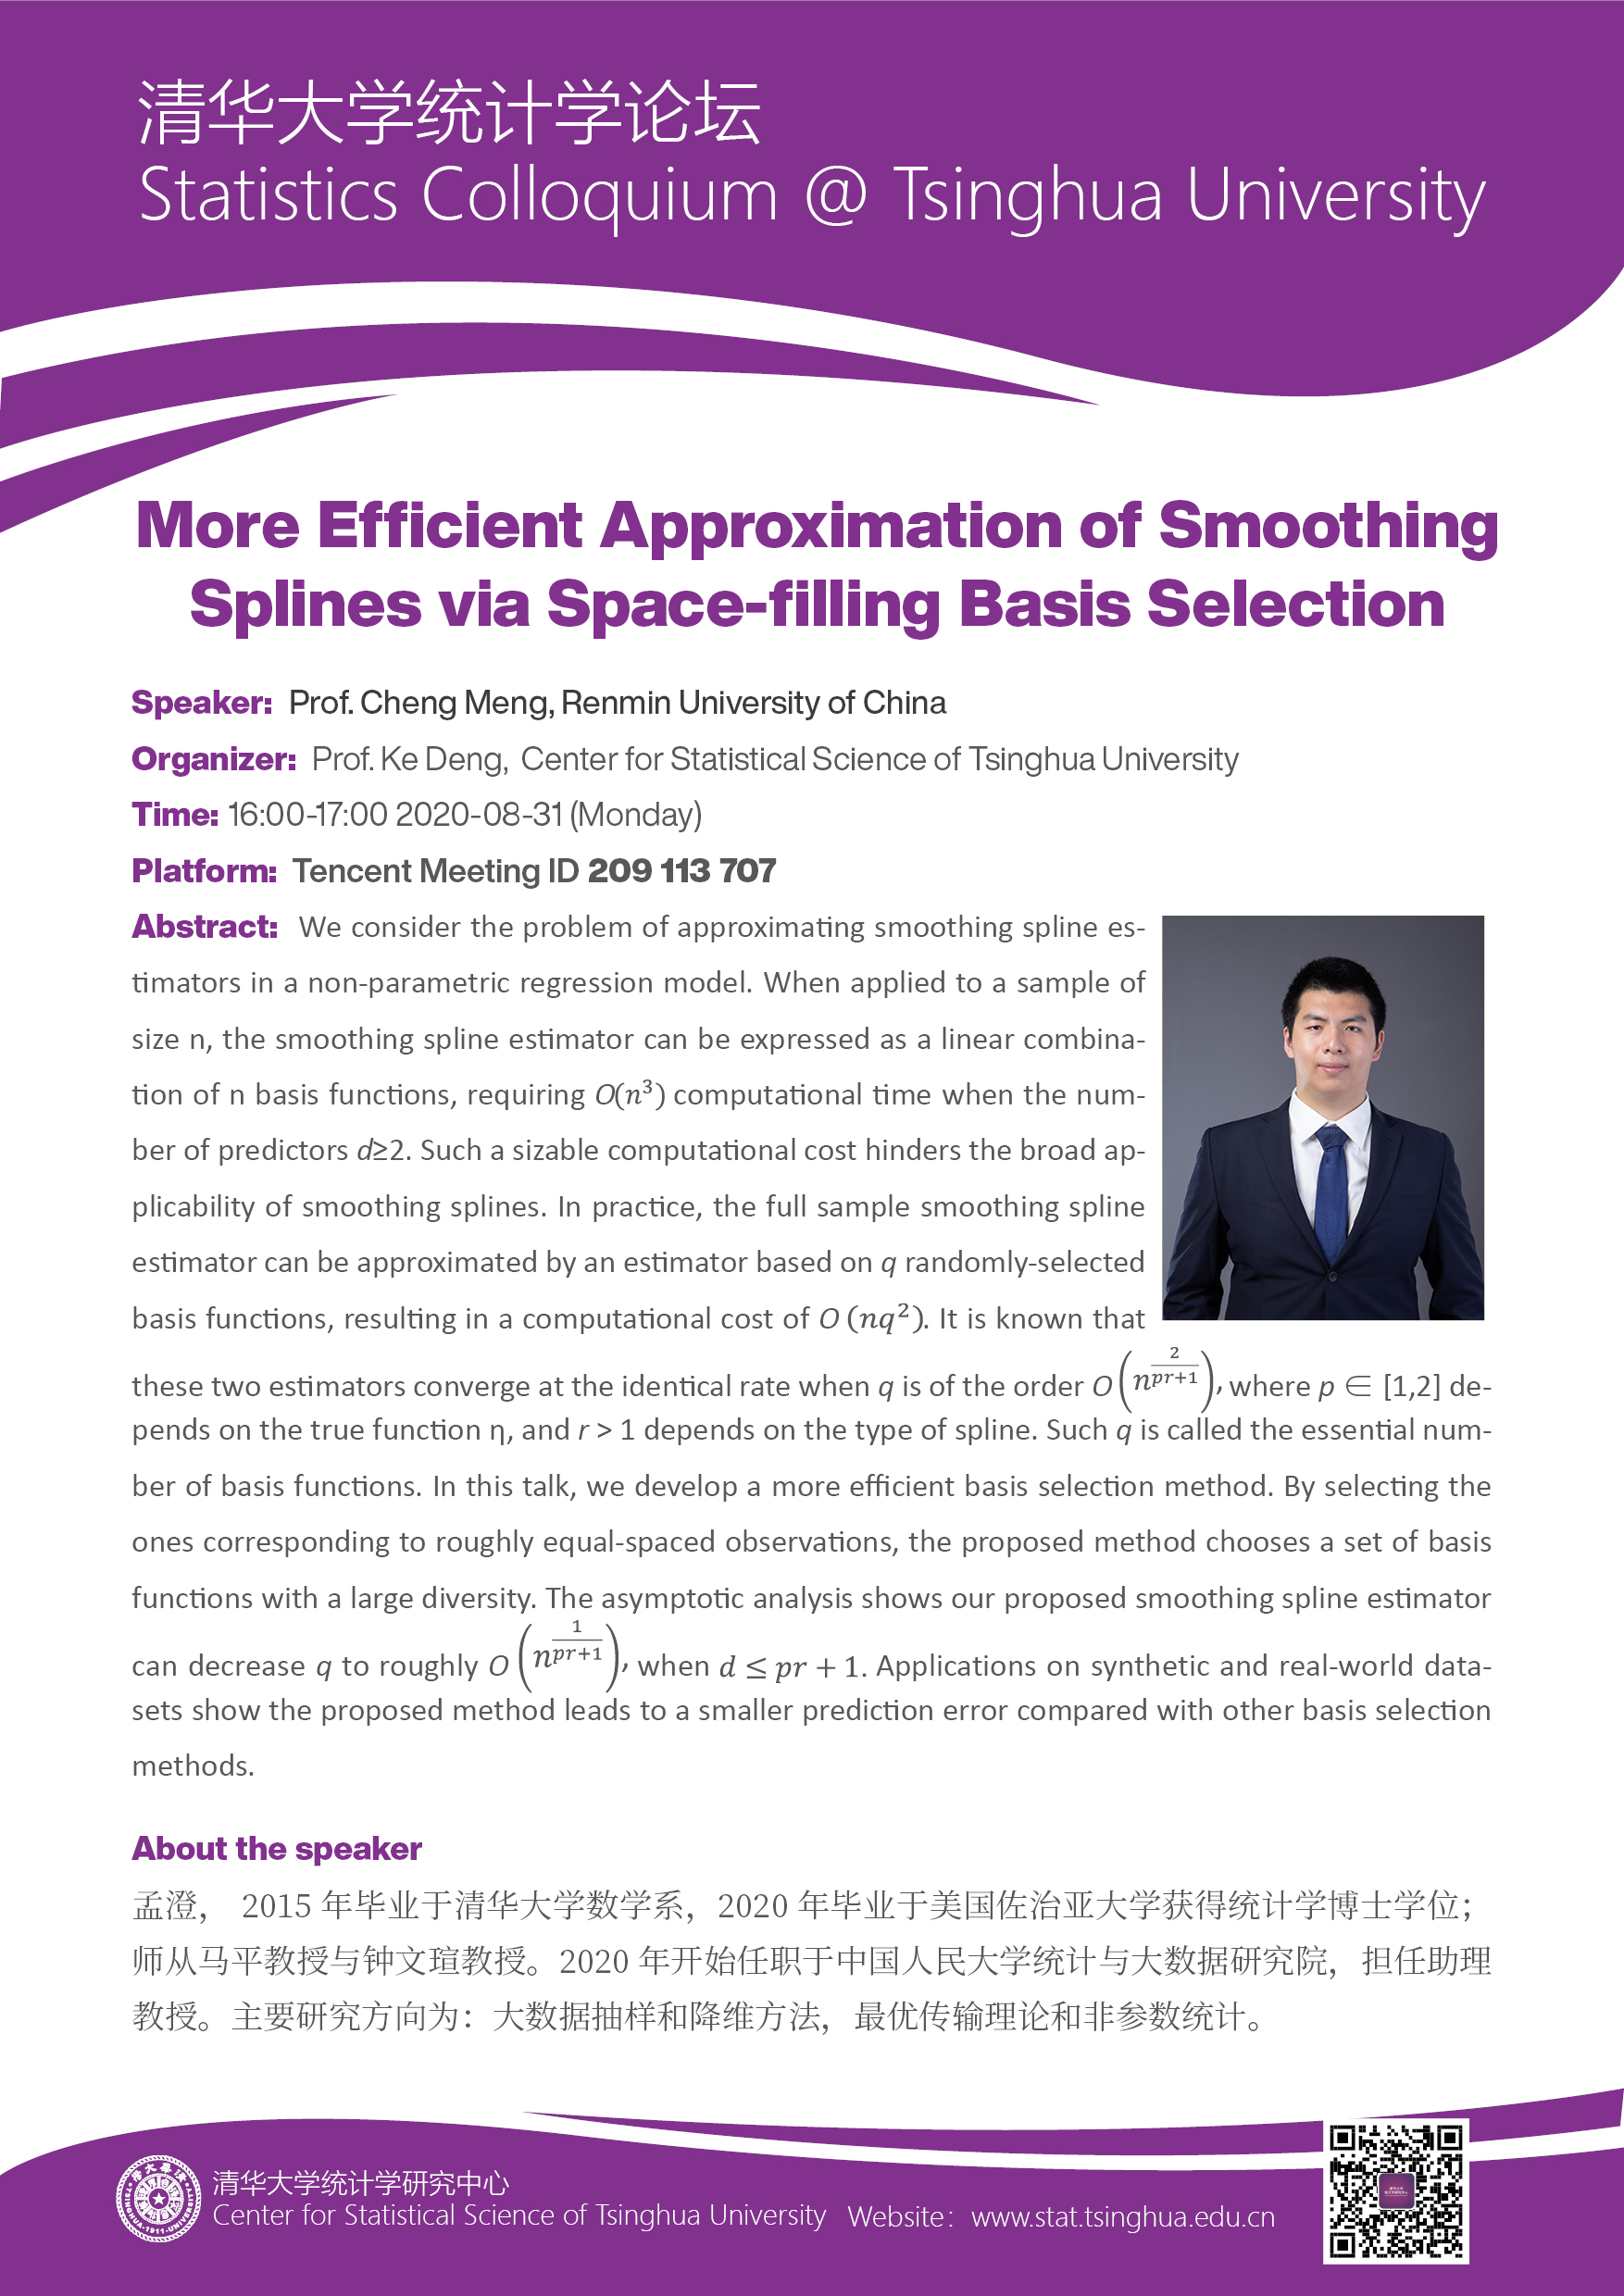 More Efficient Approximation of Smoothing Splines via Space-filling Basis Selection